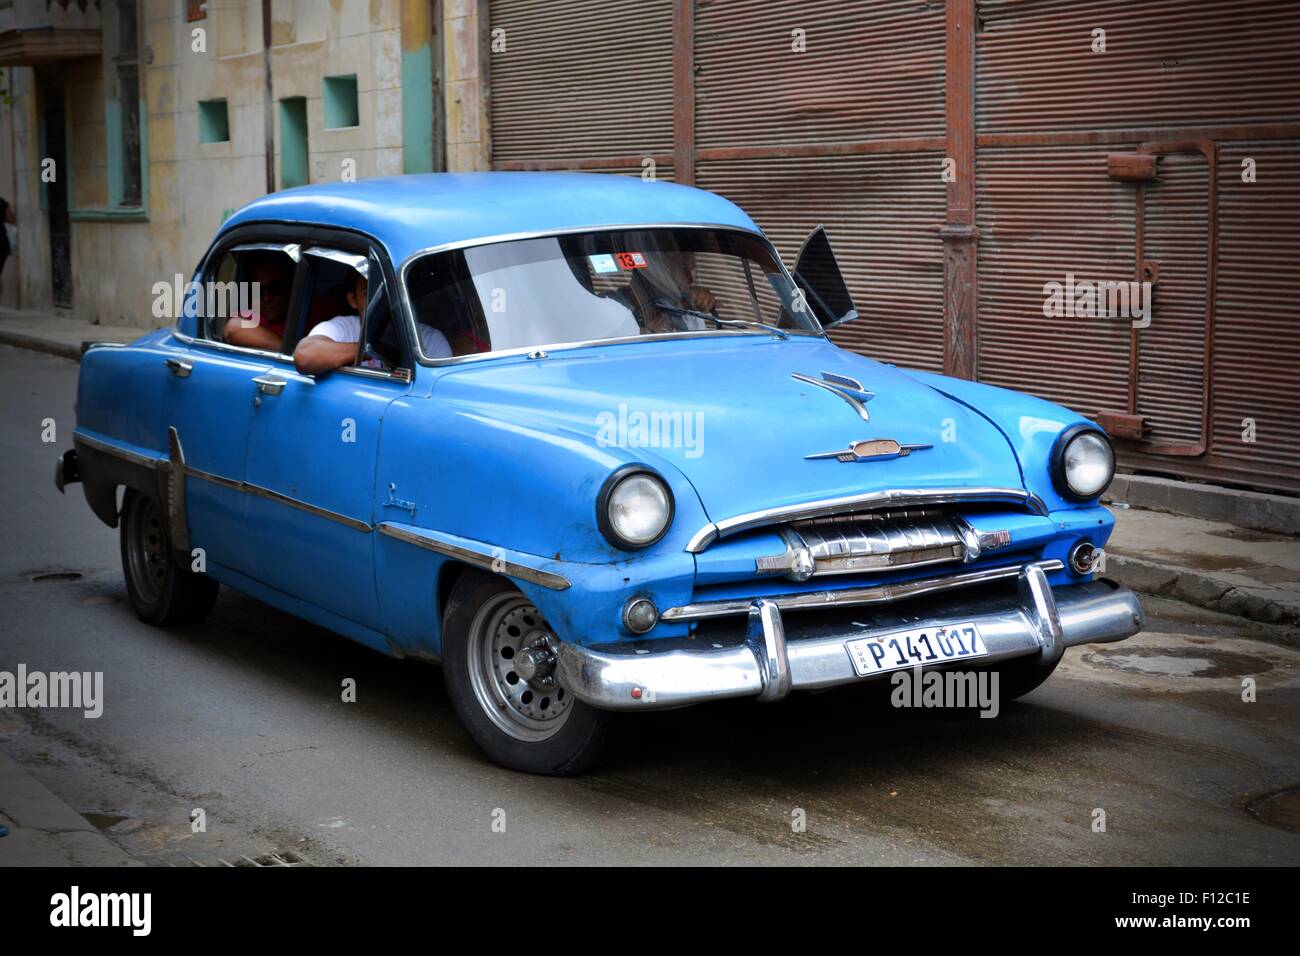 Vintage blue car with passengers driving down a wet street on the outskirts of Havana, Cuba Stock Photo